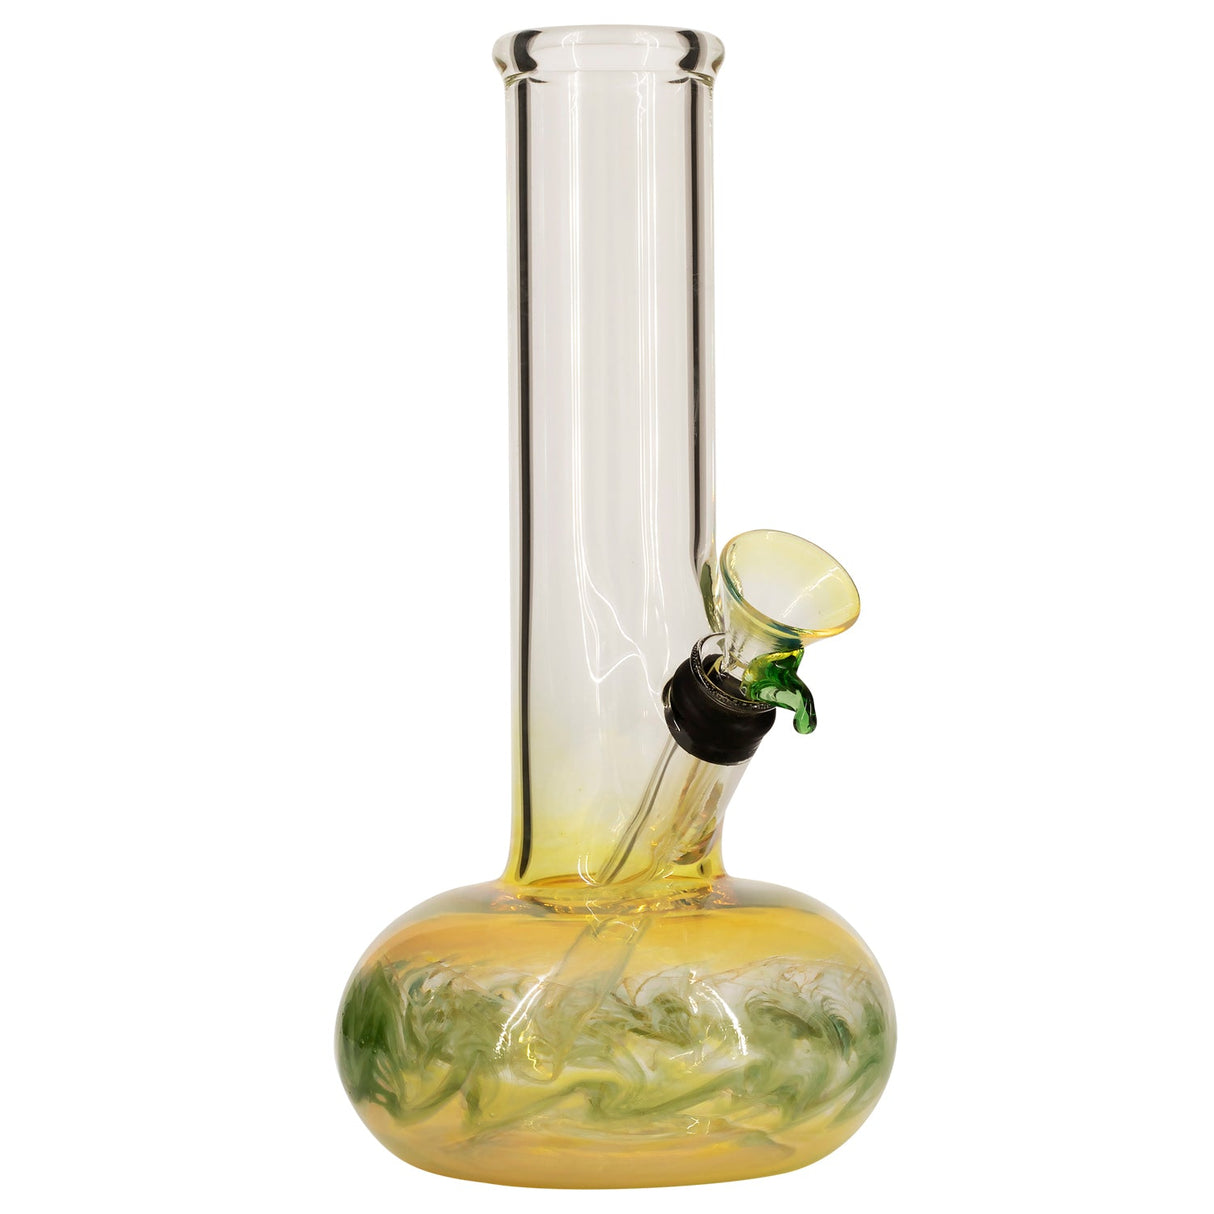 LA Pipes Raked Bubble Bong with Fumed Base, 11" Height, Borosilicate Glass, Front View